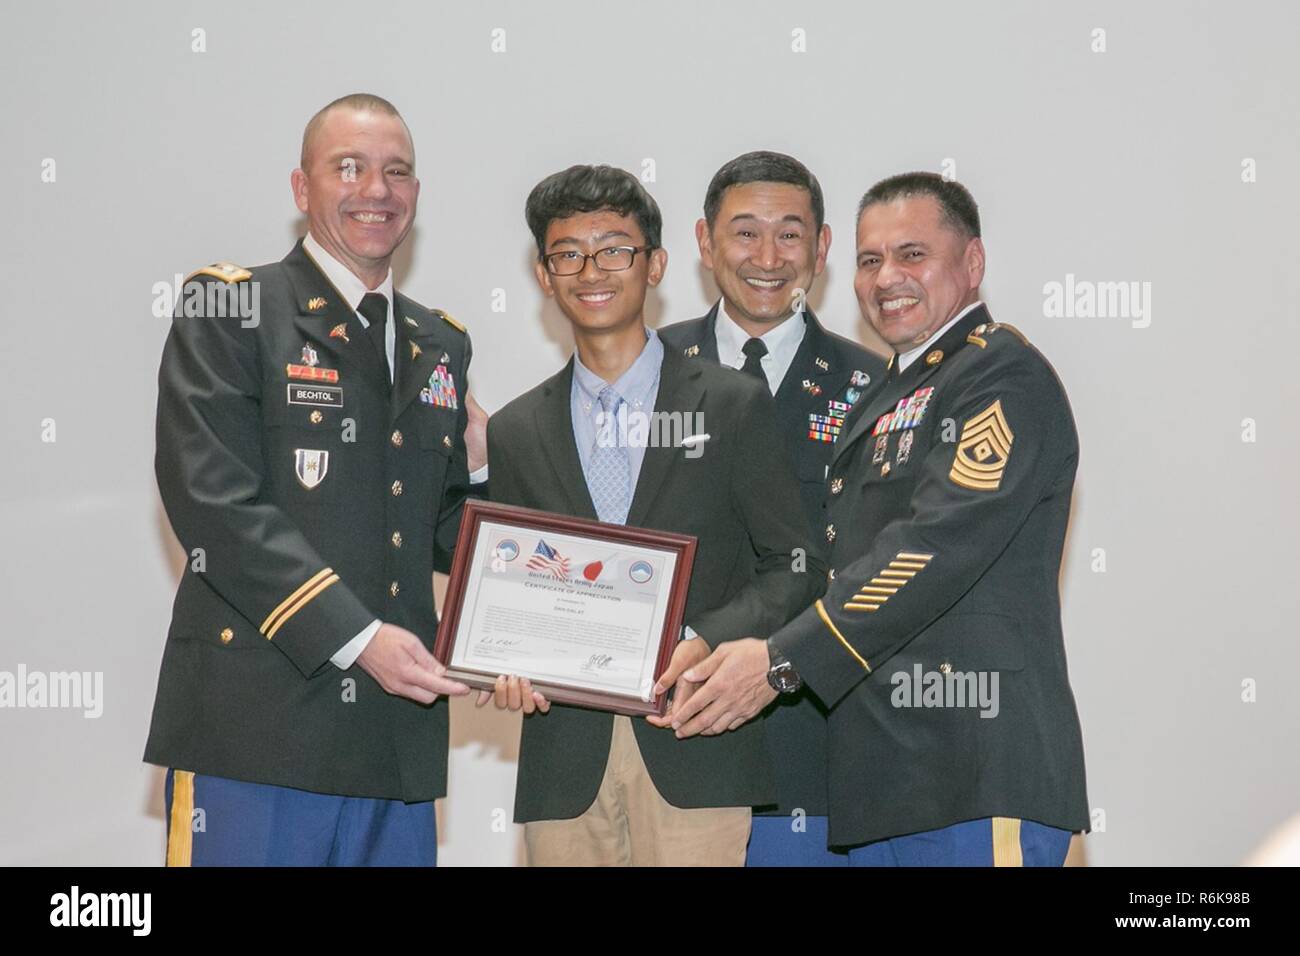 Dan Dalat, center, senior at Zama American High School, receives an award for introducing his father at the Asian American Pacific Islander Heritage Month Observance May 18, 2017 at Camp Zama Community Club. Stock Photo